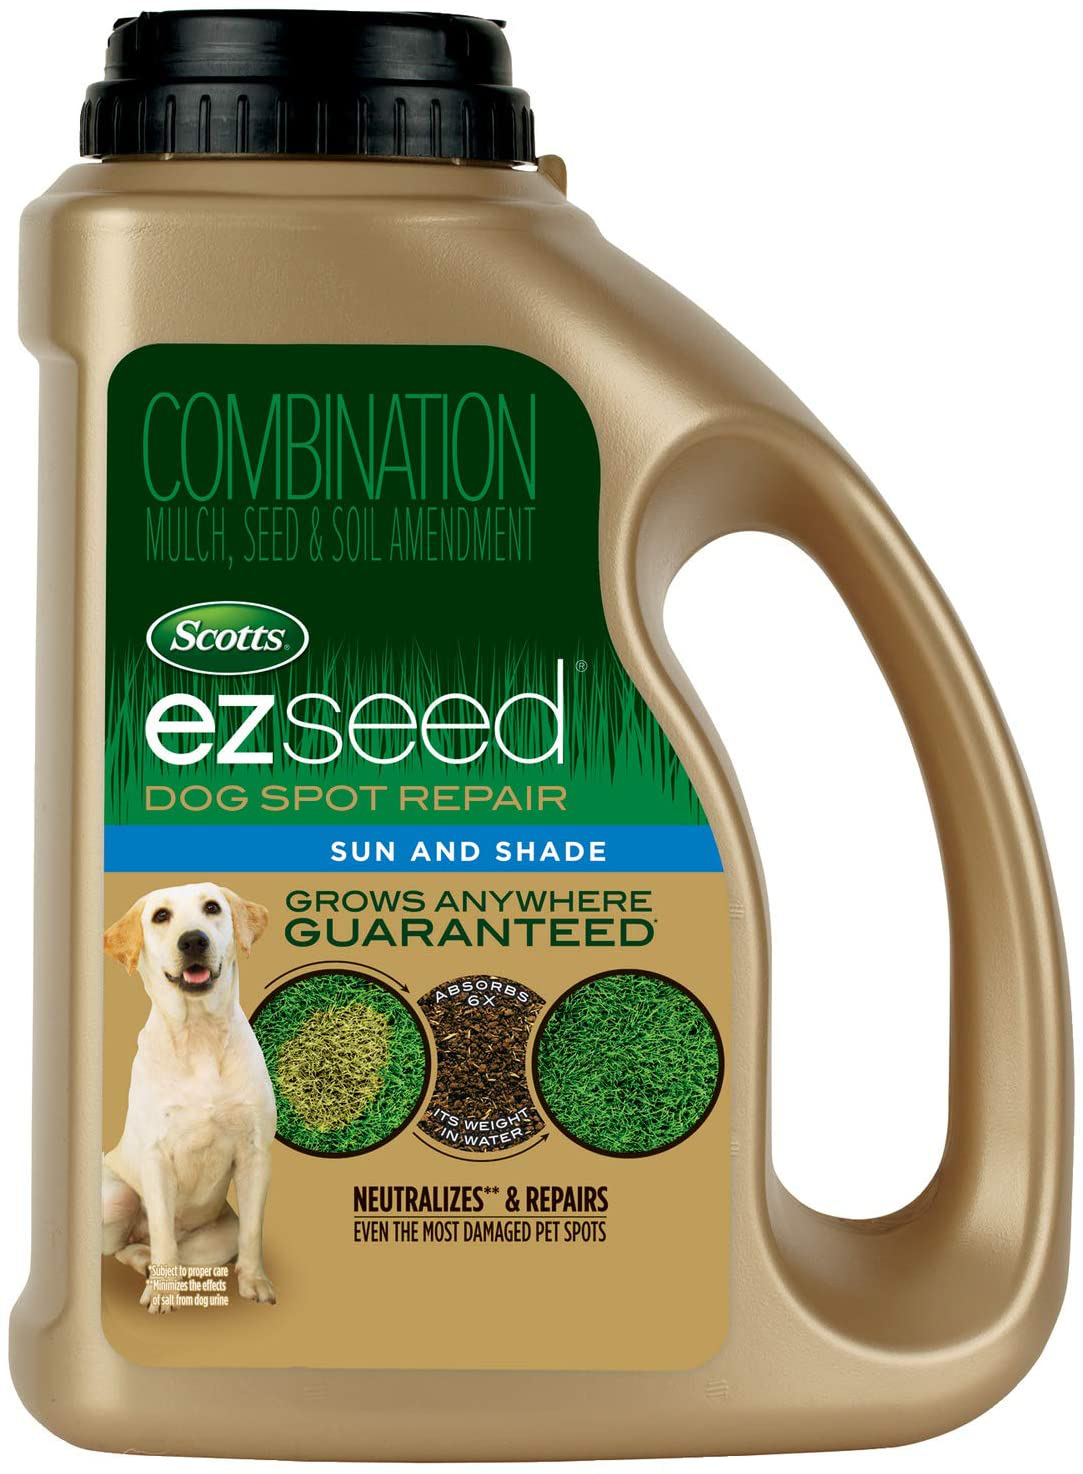 Scotts EZ Seed Dog Spot Repair Sun and Shade - 2 Lb., Mulch, Seed and Soil Amendment with Protectant and Tackifier, Repairs Pet Spots